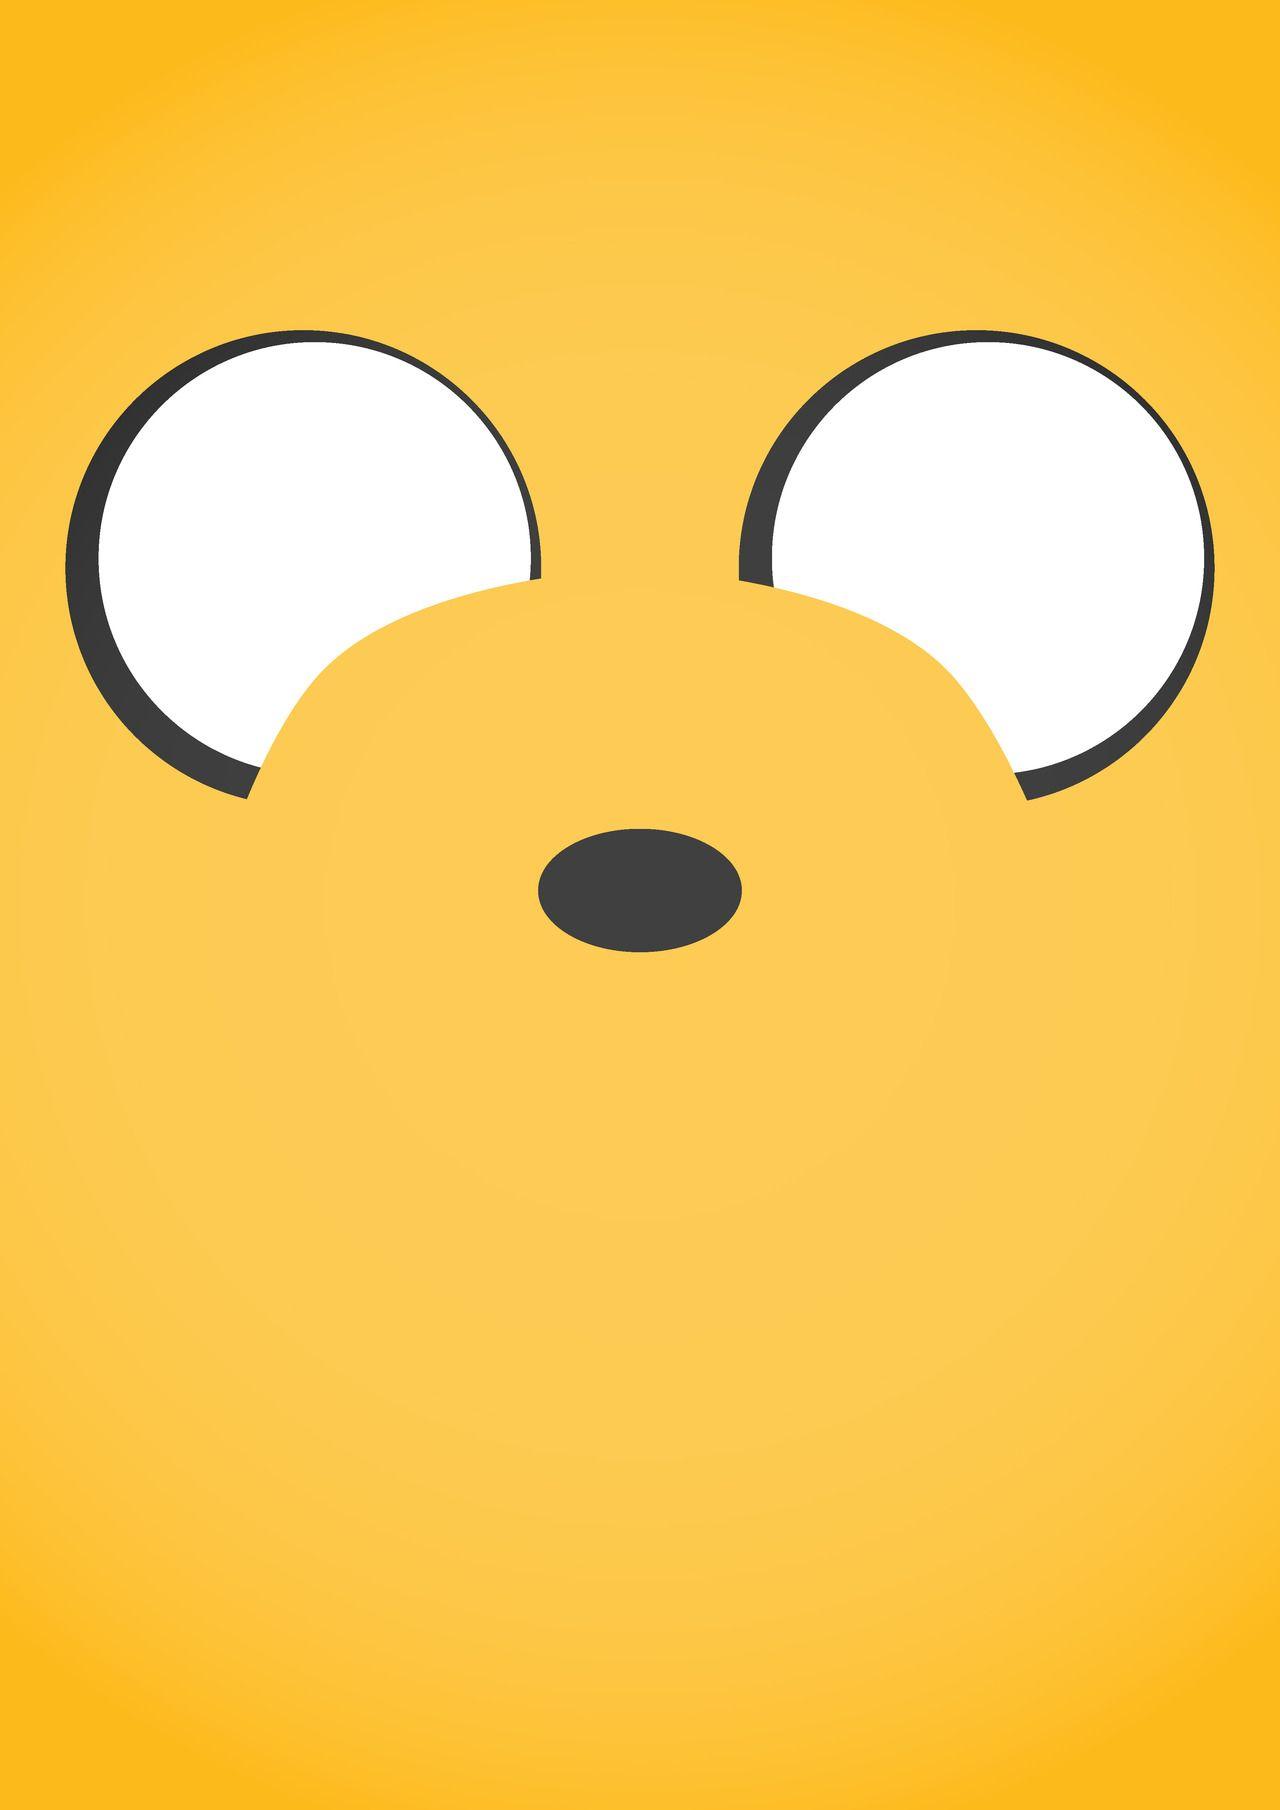 Wallpaper.wiki Download Free Adventure Time IPhone Wallpaper PIC